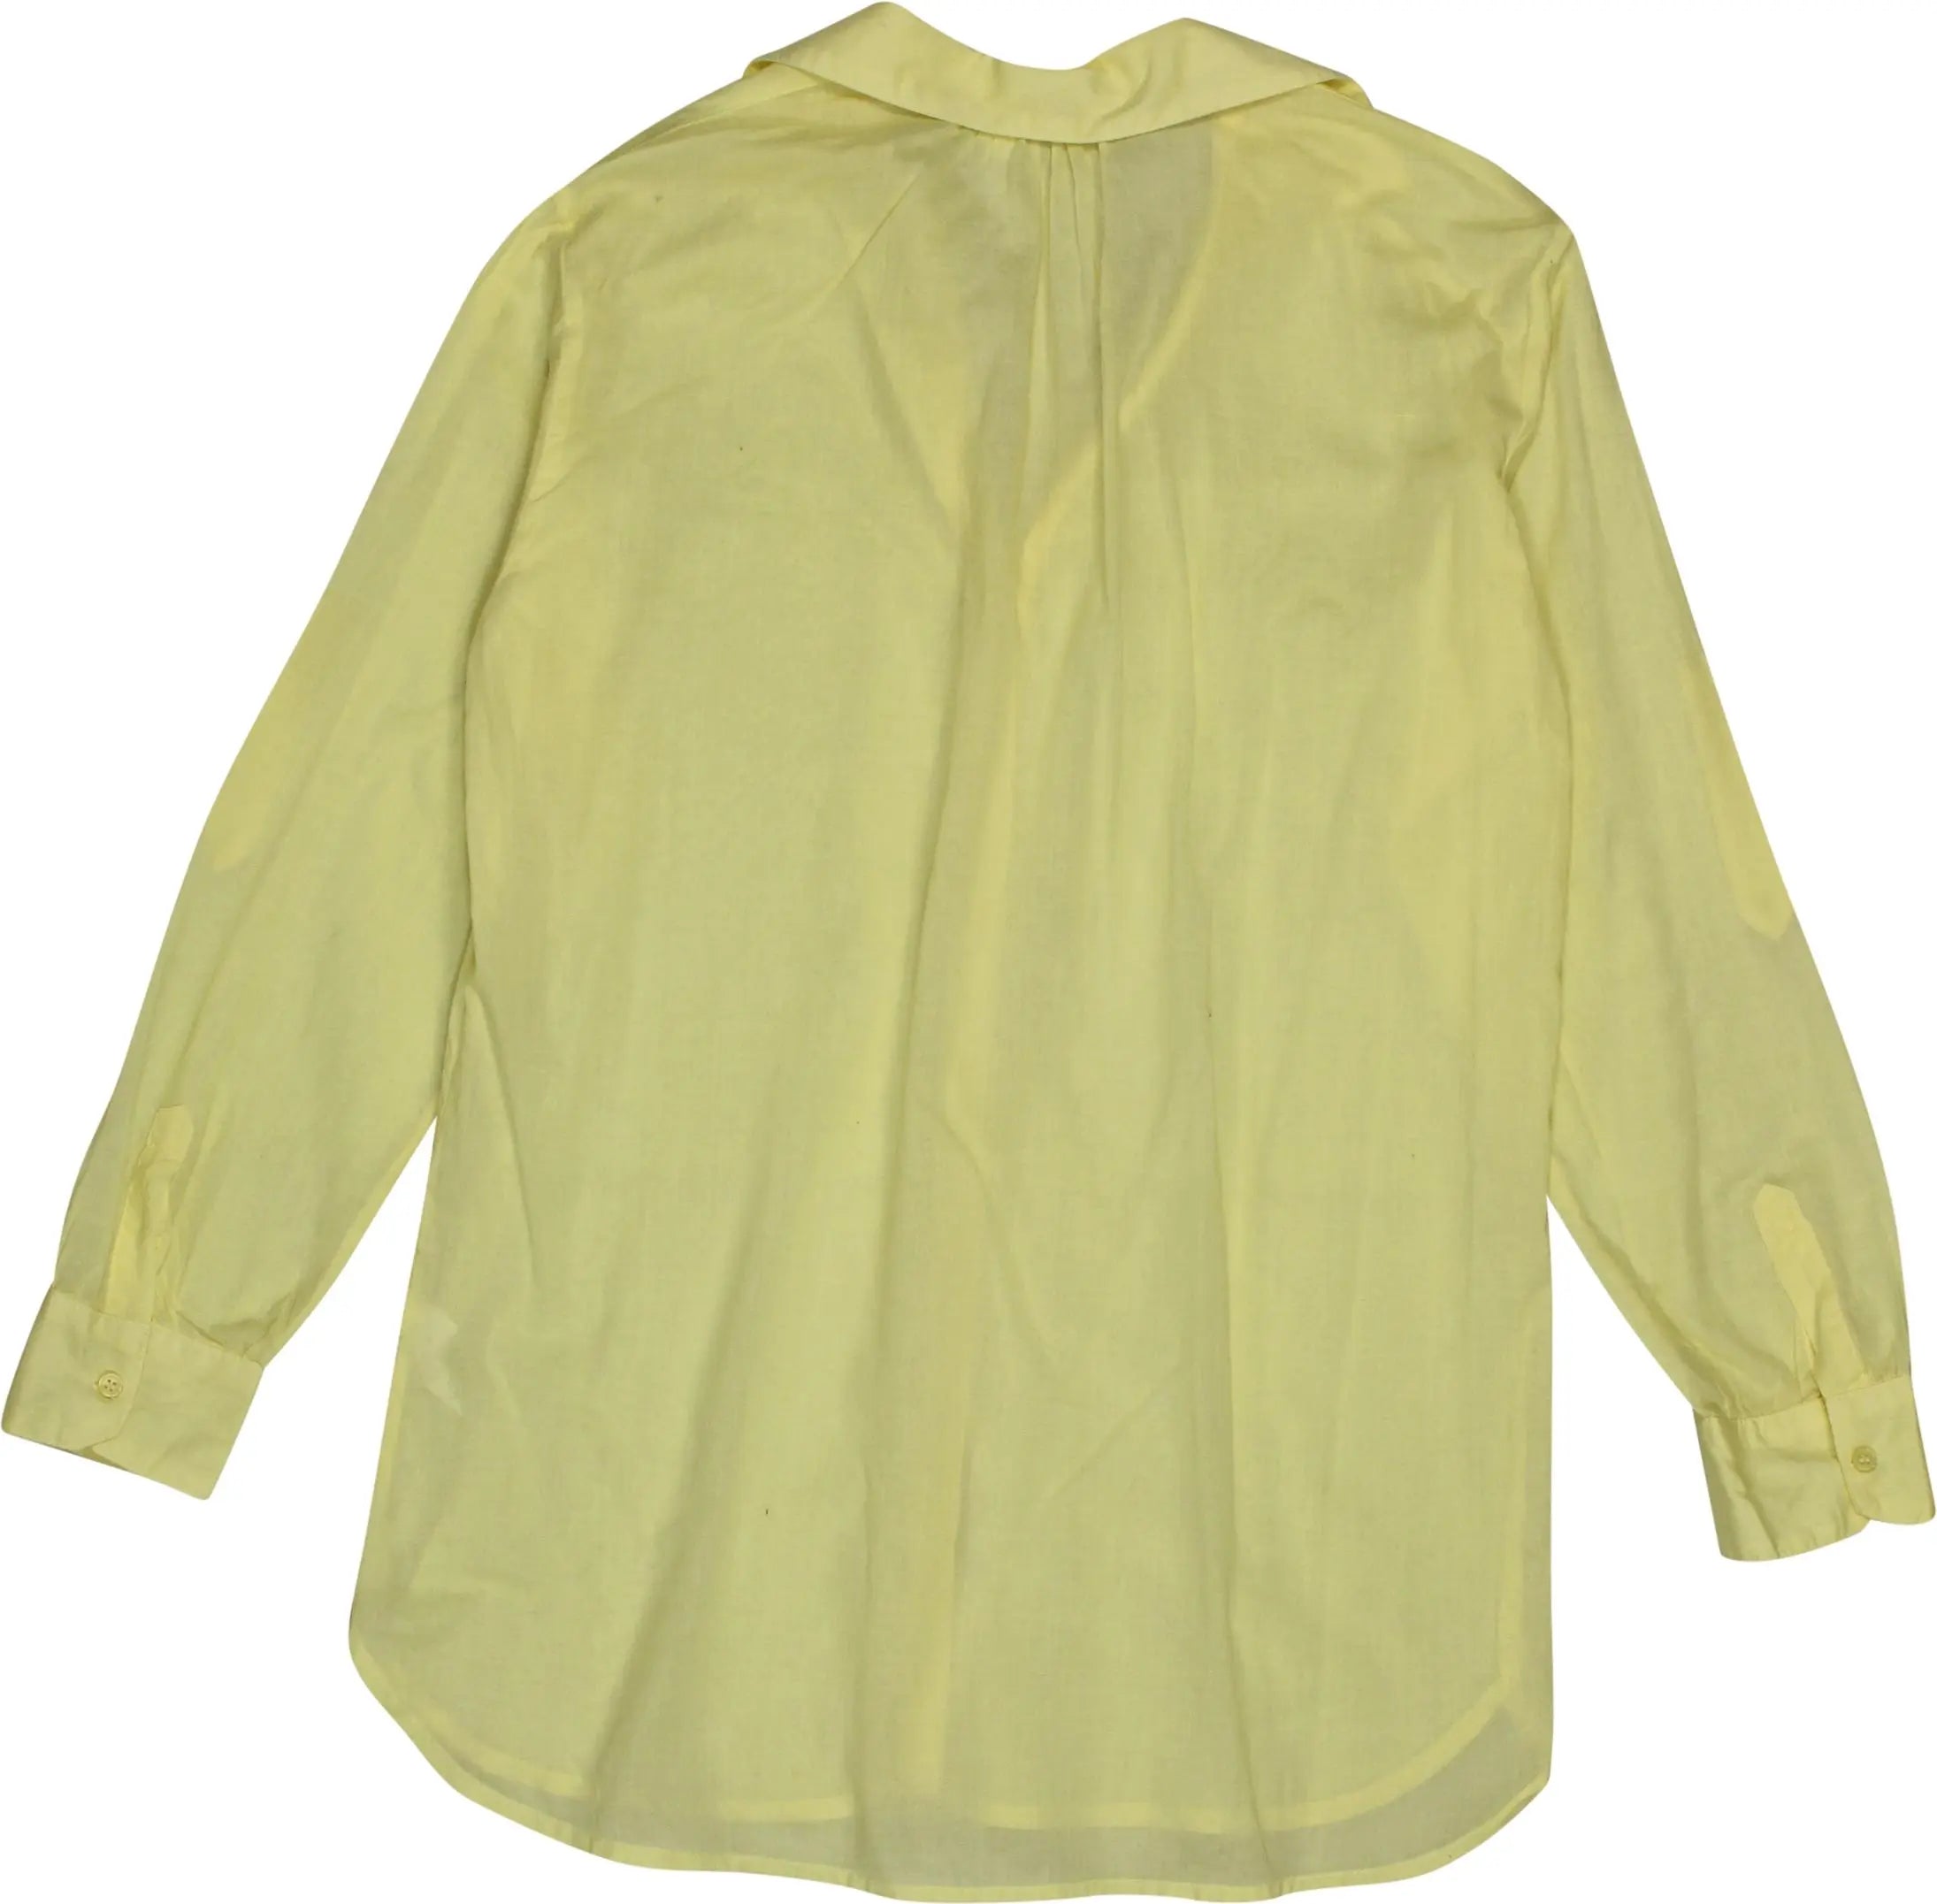 H&M - Yellow Blouse- ThriftTale.com - Vintage and second handclothing